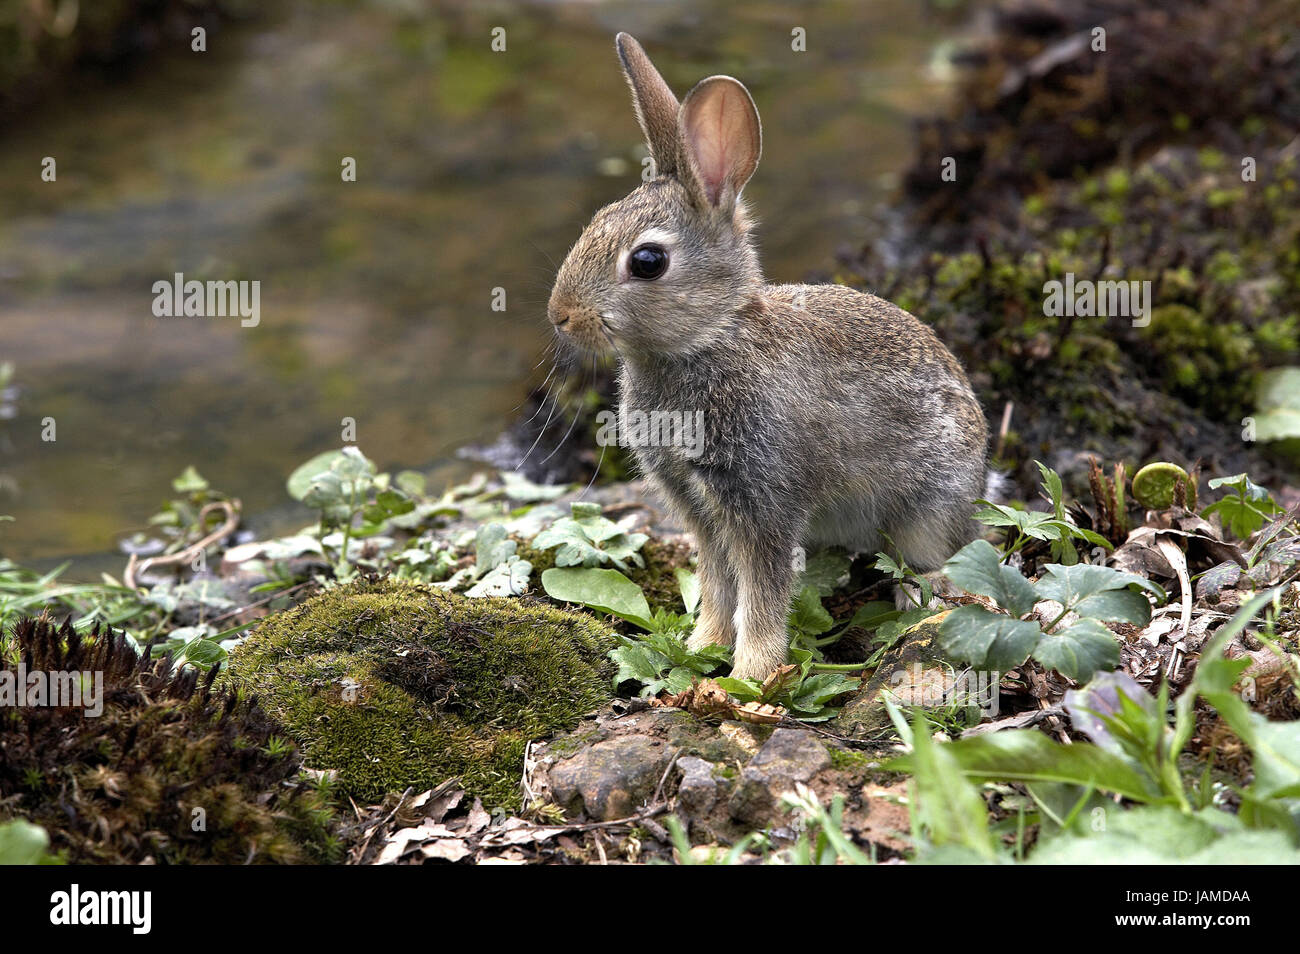 Wild rabbits,Oryctolagus cuniculus,young animal,Normandy, Stock Photo